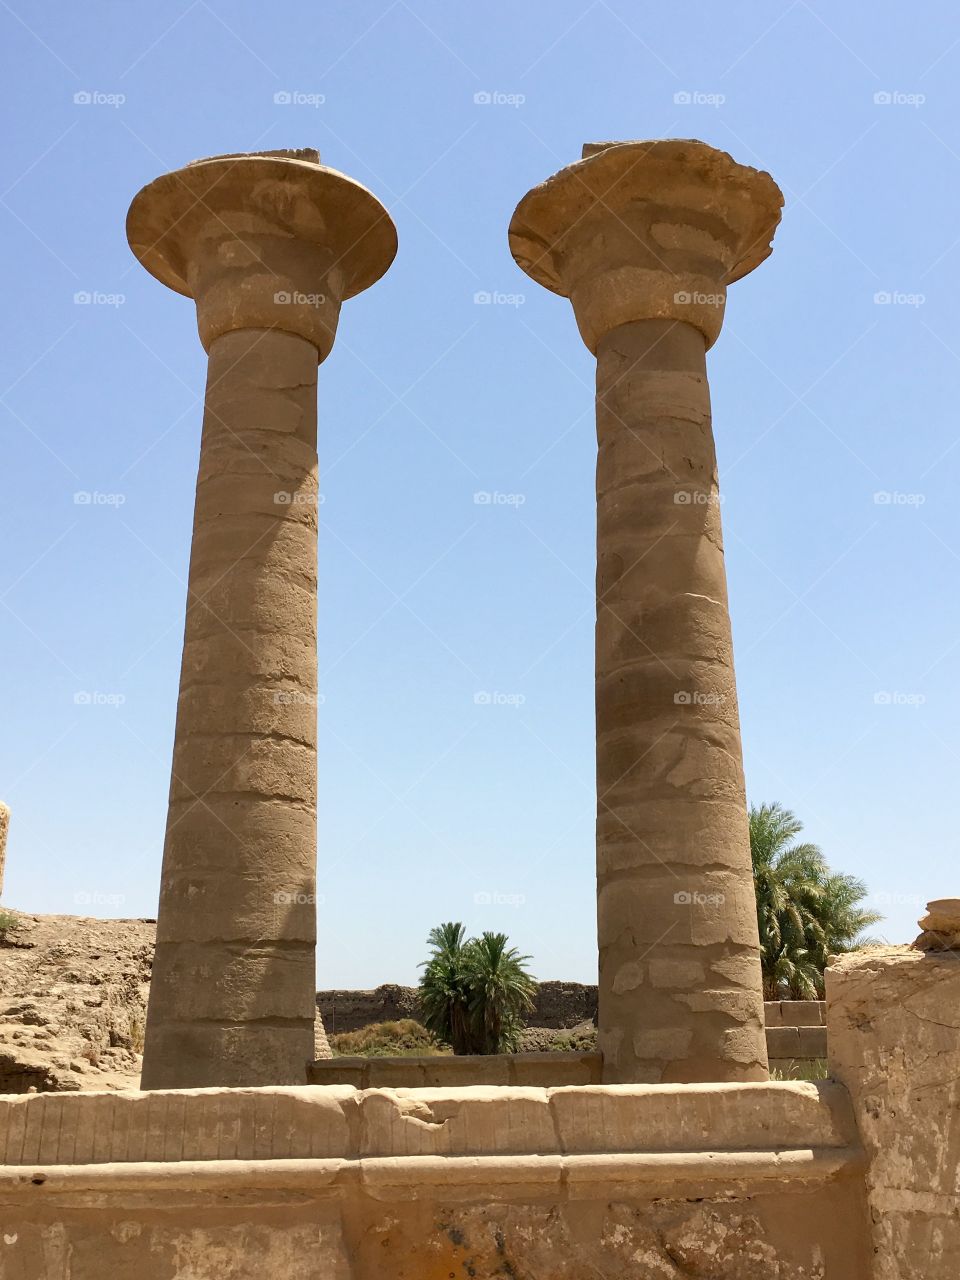 Architecture, Ancient, Travel, Column, Archaeology